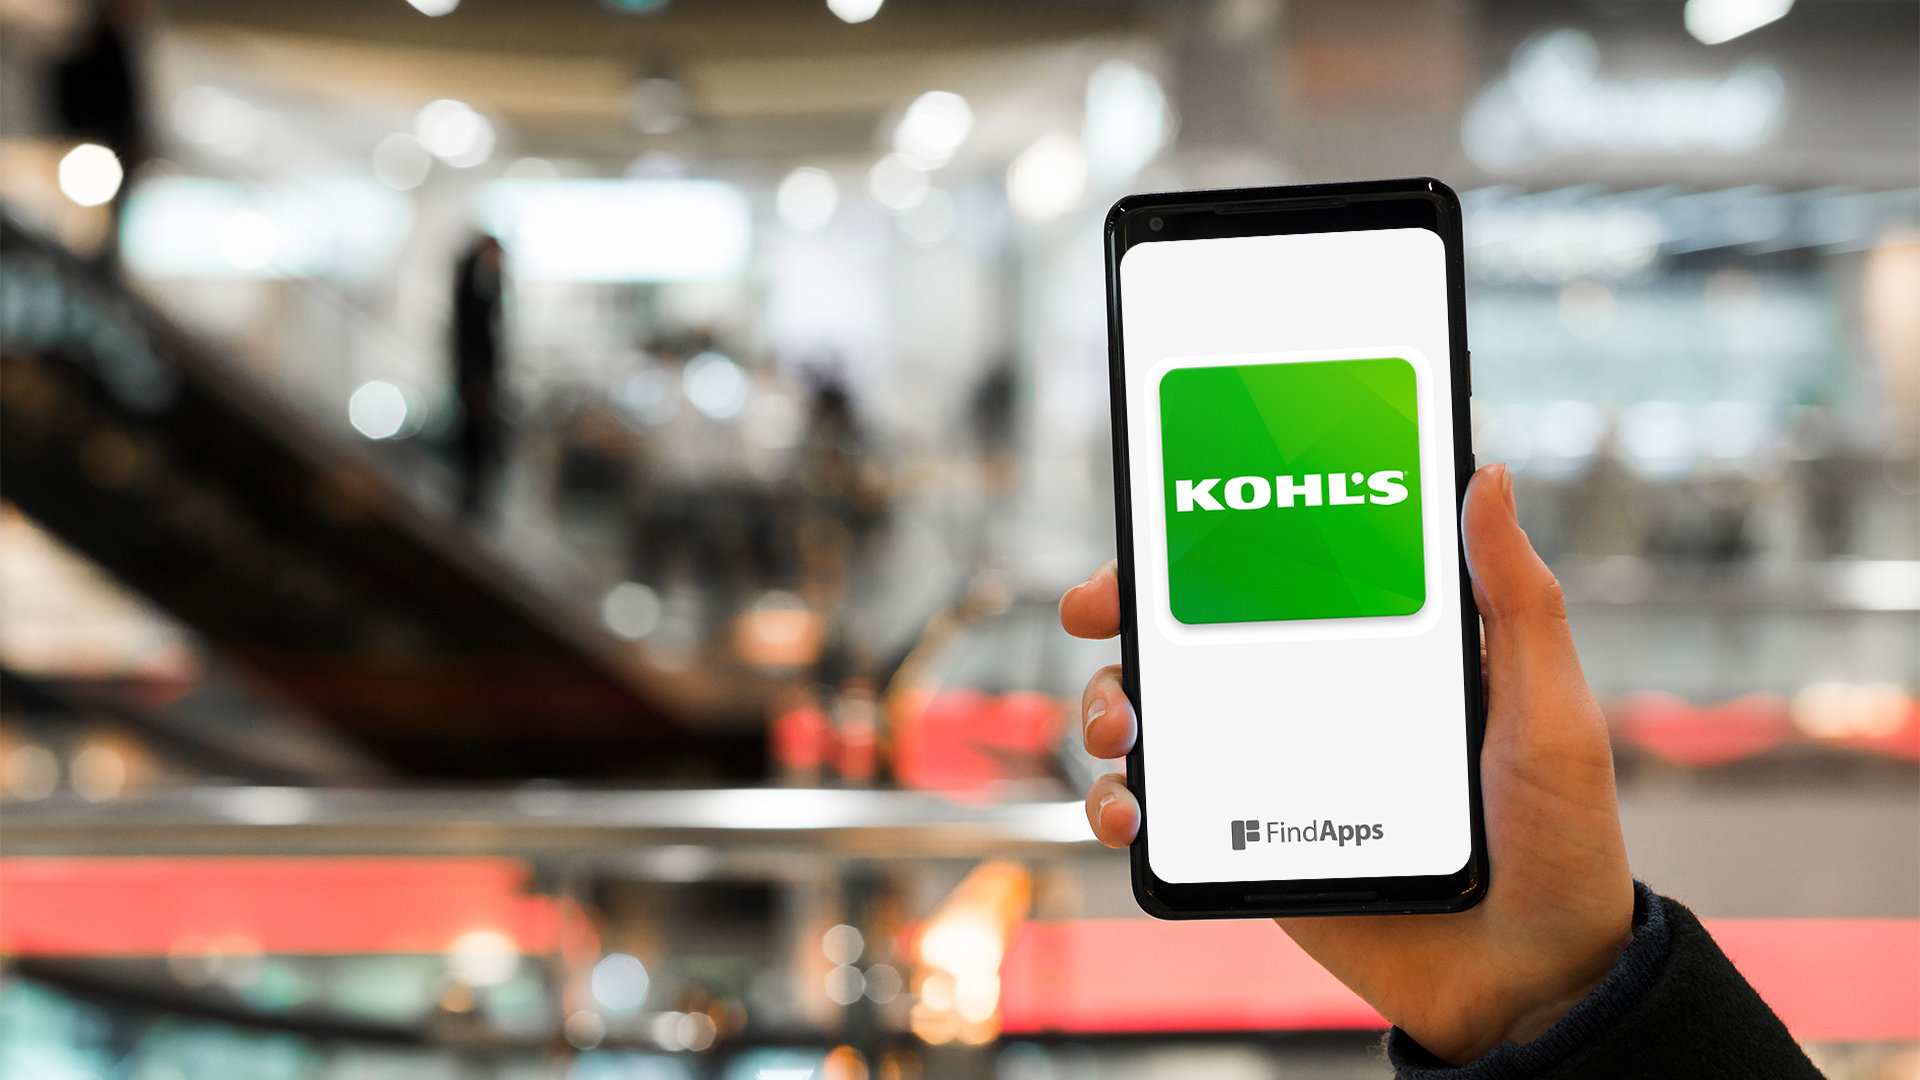 Kohl's - Shopping & Discounts app review